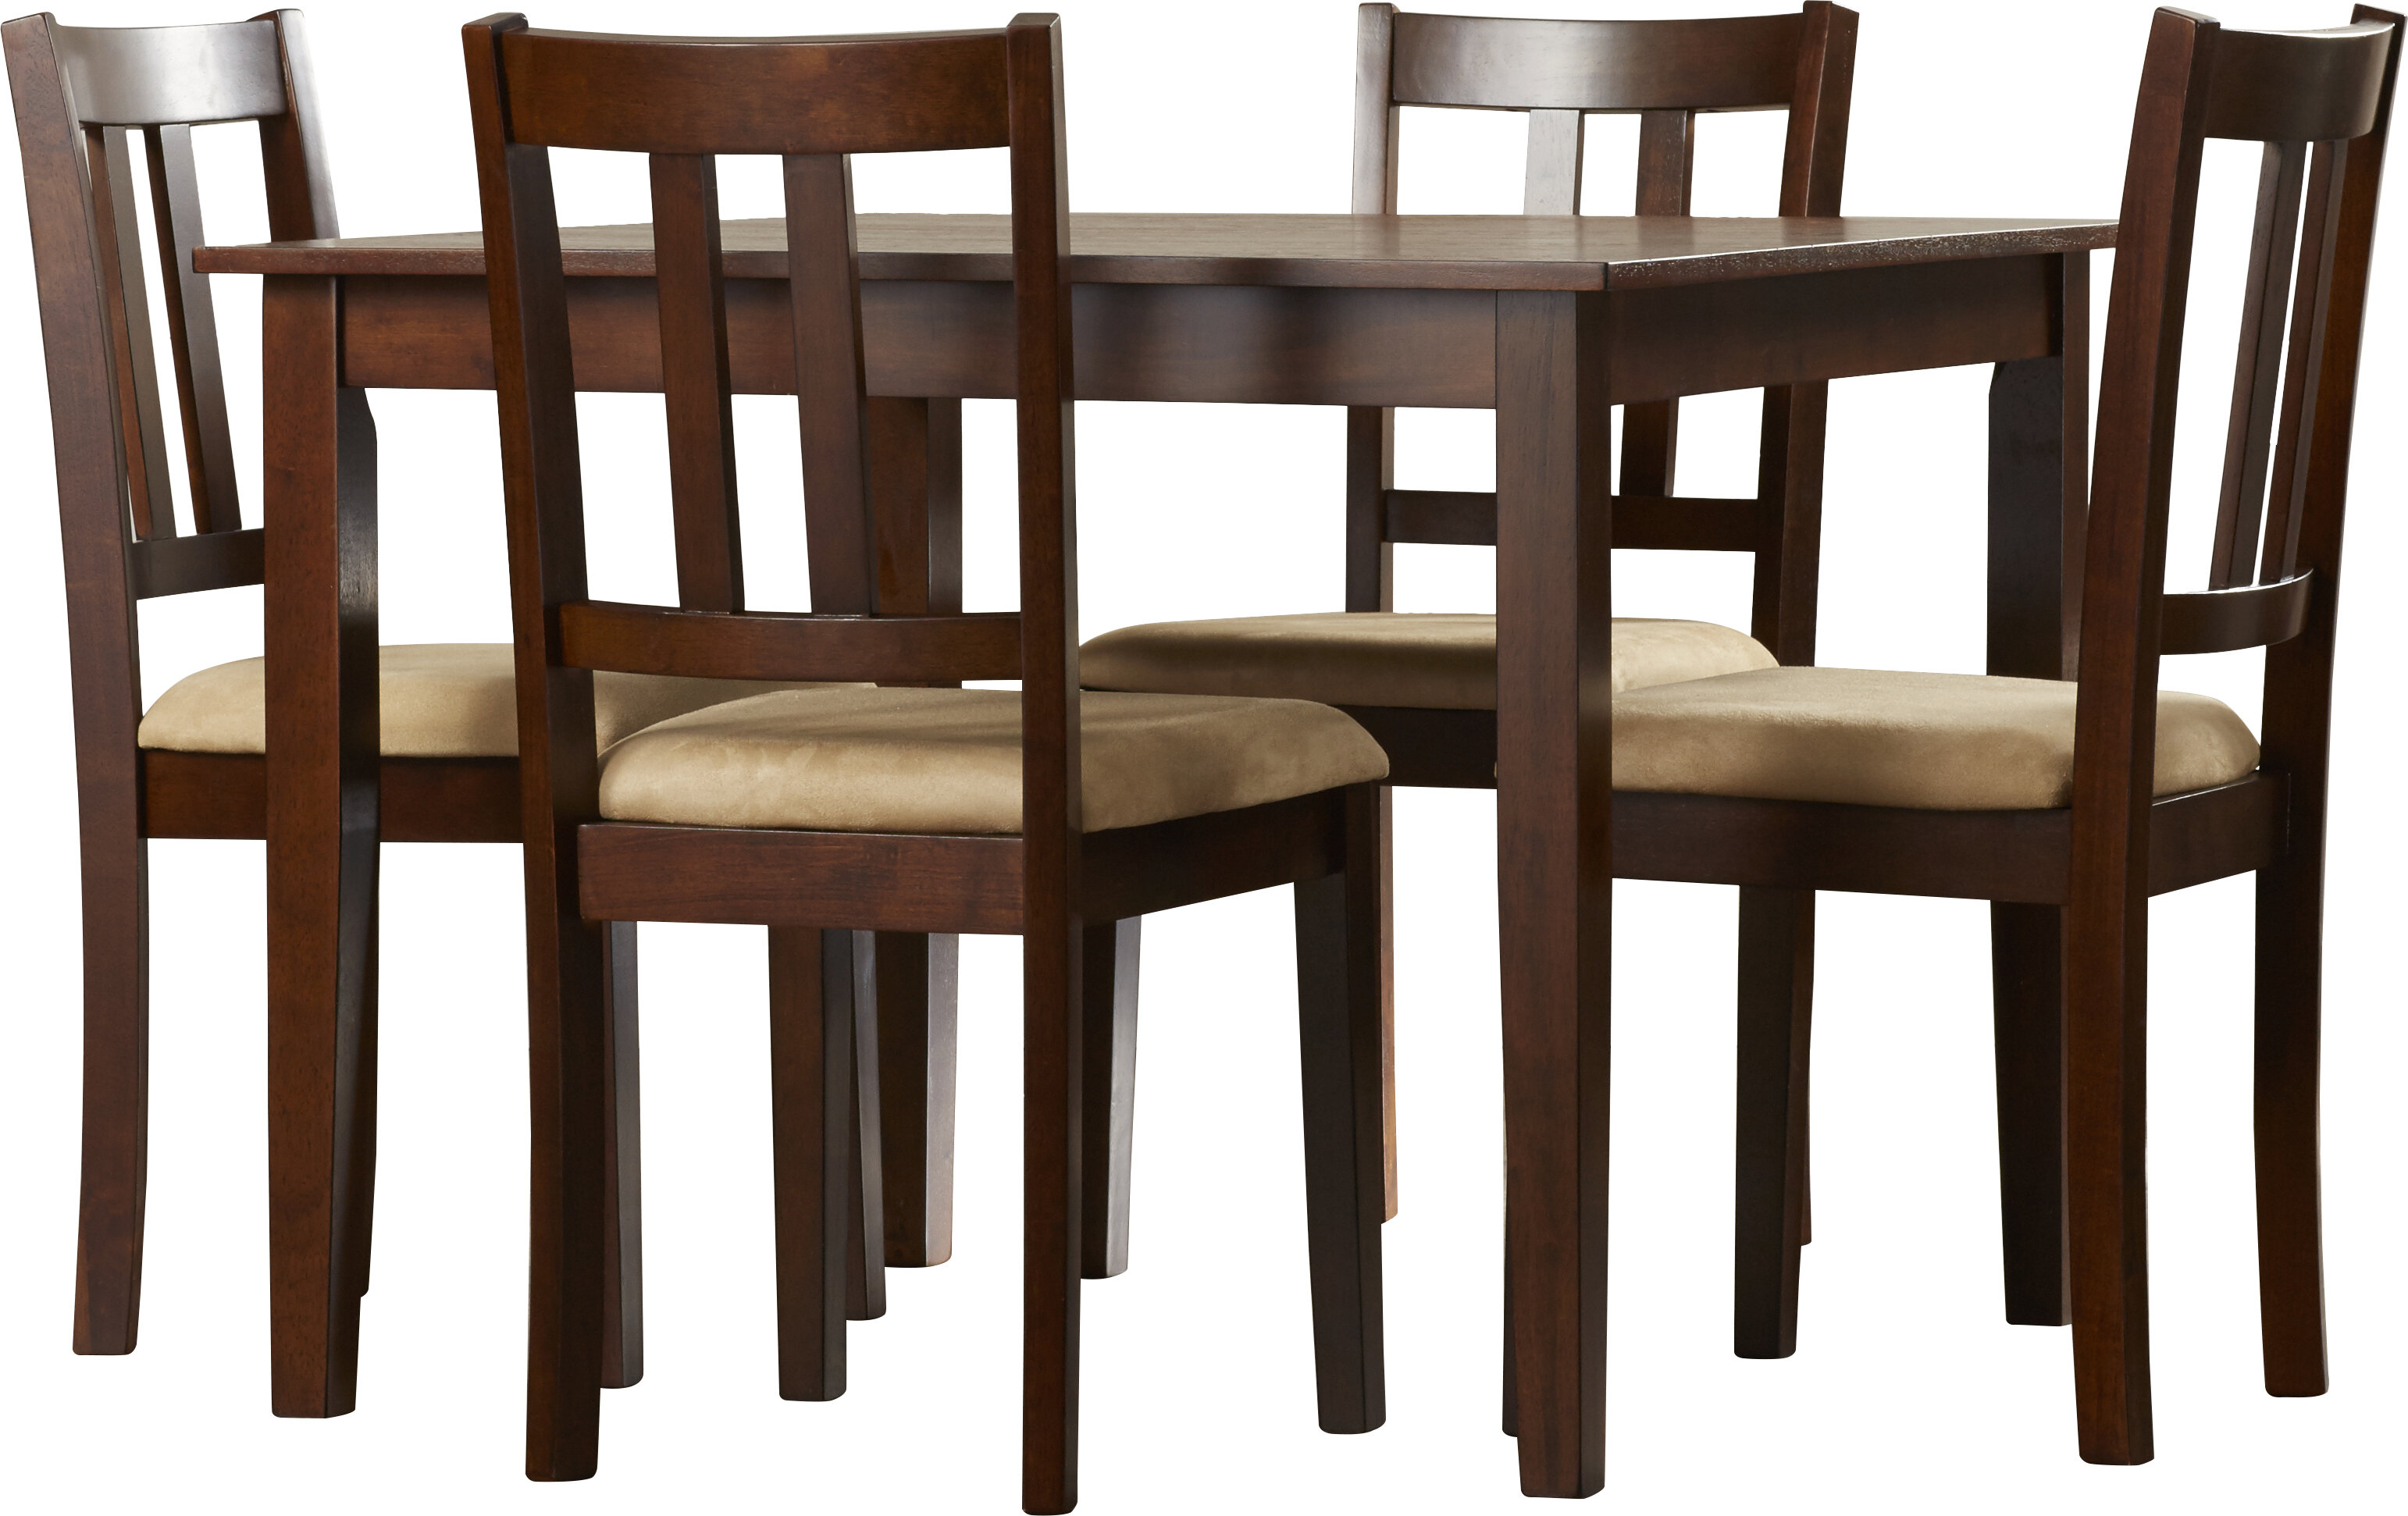 5 Piece Dining Set Under 250 Crate And Barrel Kitchen Table Chairs